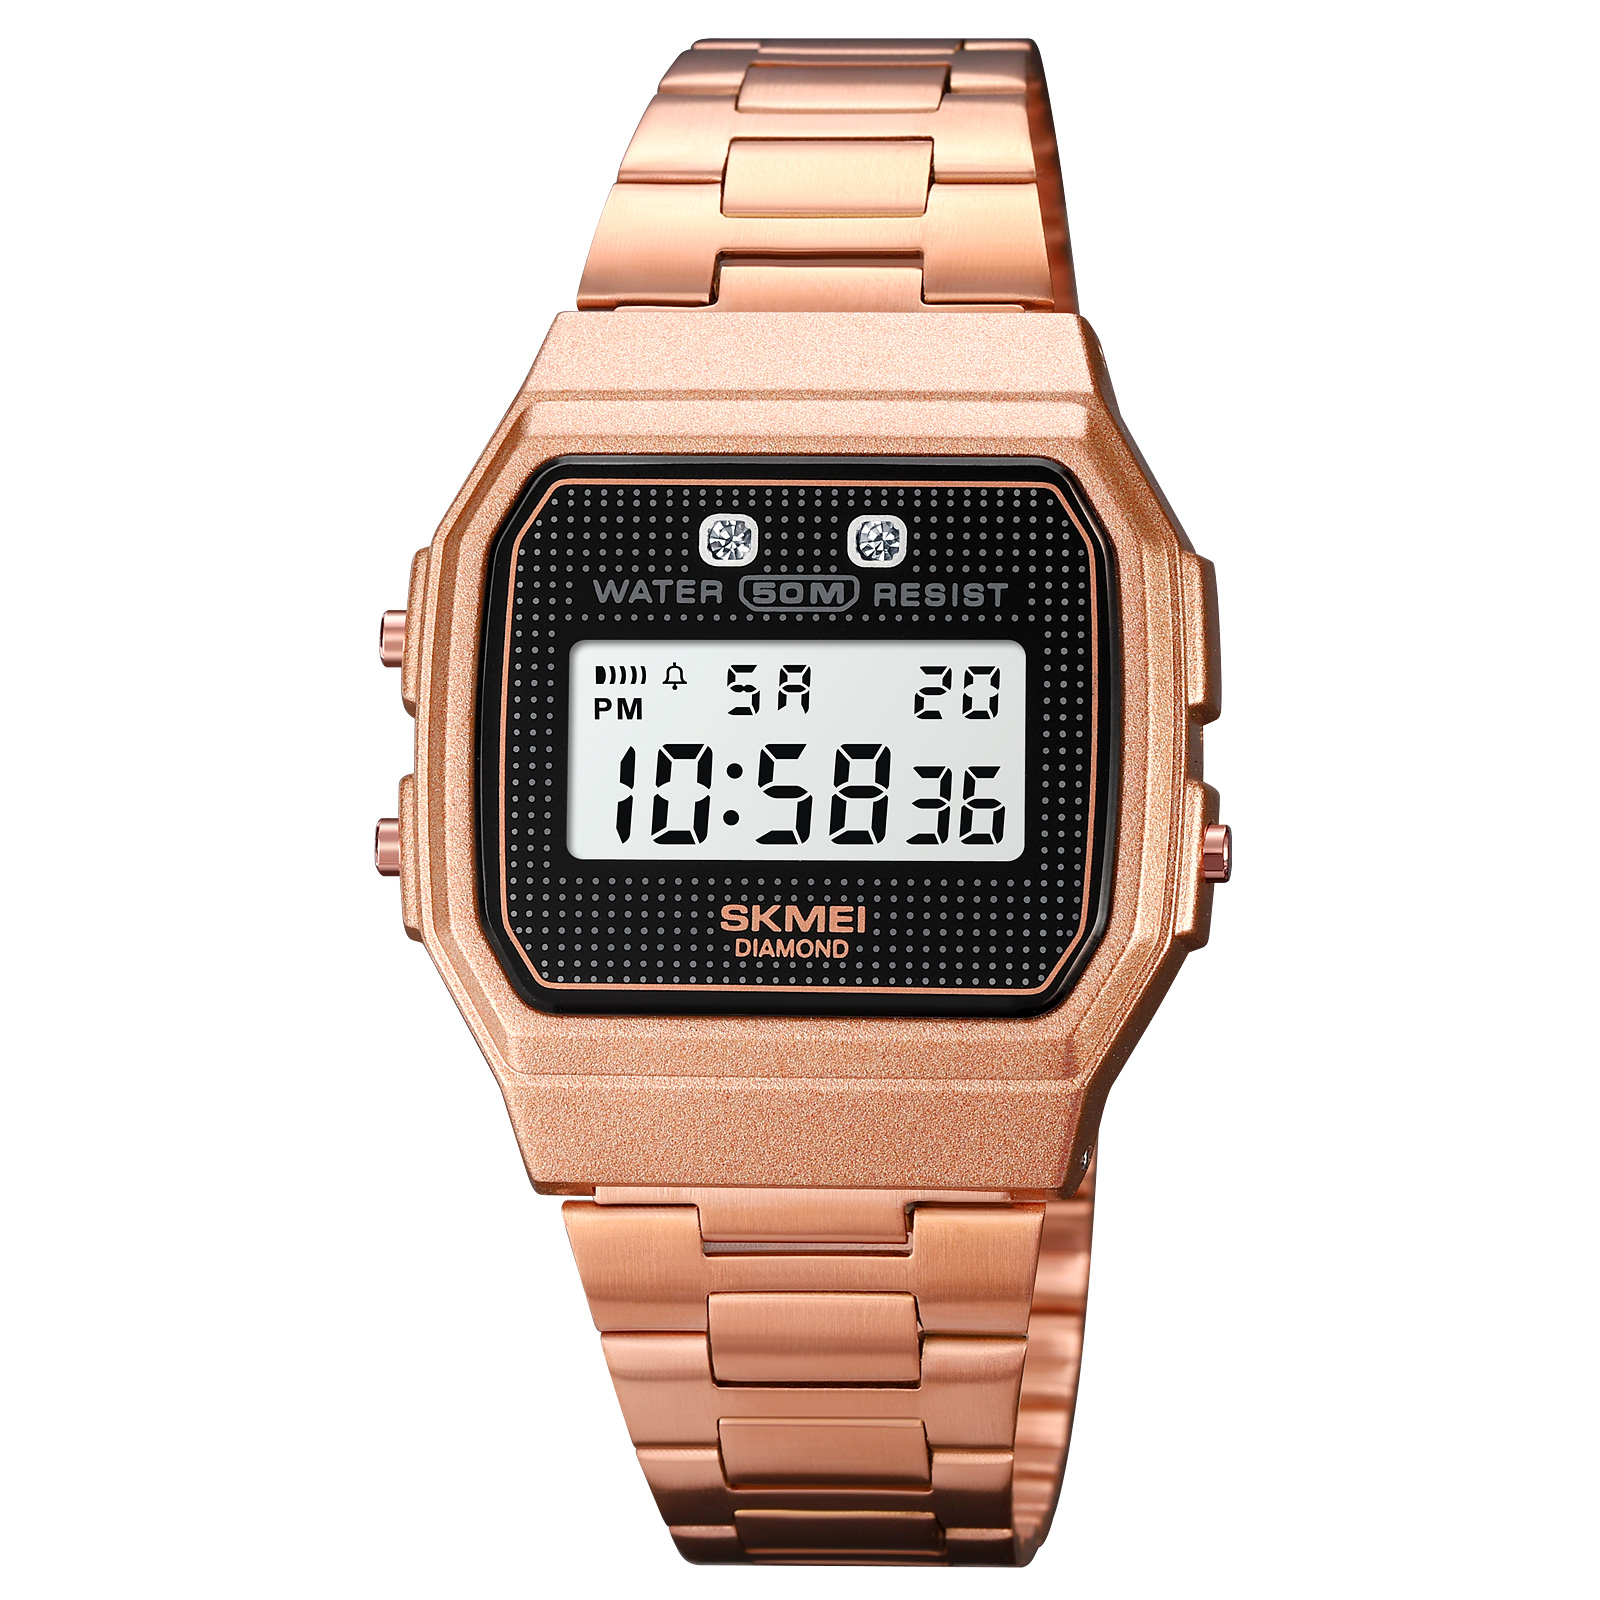  low price sports watches-Skmei Watch Manufacture Co.,Ltd